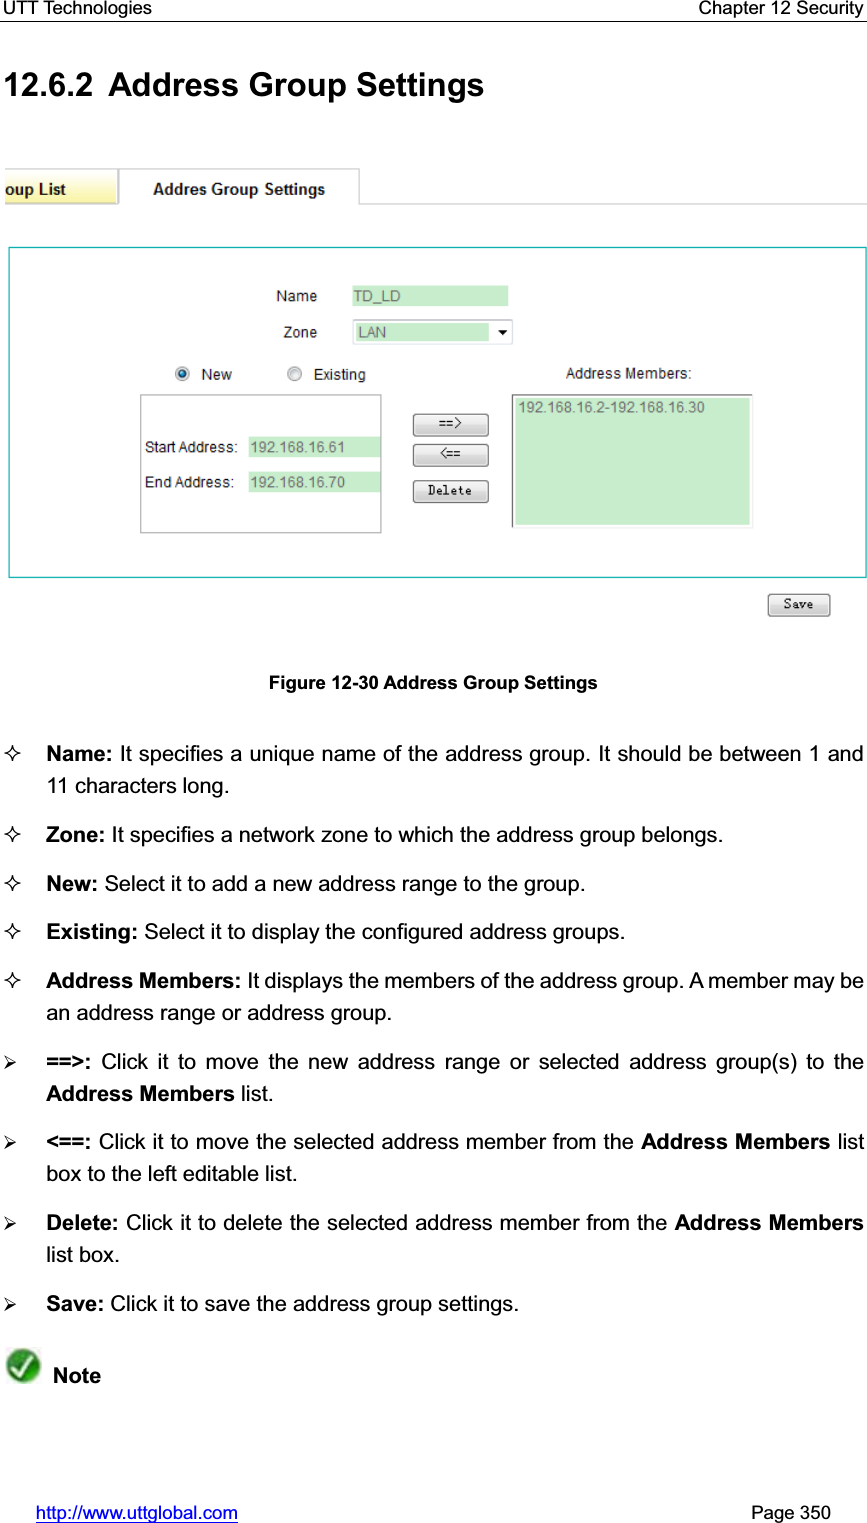 UTT Technologies    Chapter 12 Security   http://www.uttglobal.com                                                       Page 350 12.6.2  Address Group Settings Figure 12-30 Address Group Settings Name: It specifies a unique name of the address group. It should be between 1 and 11 characters long.   Zone: It specifies a network zone to which the address group belongs.   New: Select it to add a new address range to the group. Existing: Select it to display the configured address groups.   Address Members: It displays the members of the address group. A member may be an address range or address group. ¾==&gt;:  Click it to move the new address range or selected address group(s) to theAddress Members list. ¾&lt;==: Click it to move the selected address member from the Address Members list box to the left editable list. ¾Delete: Click it to delete the selected address member from the Address Memberslist box. ¾Save: Click it to save the address group settings.Note